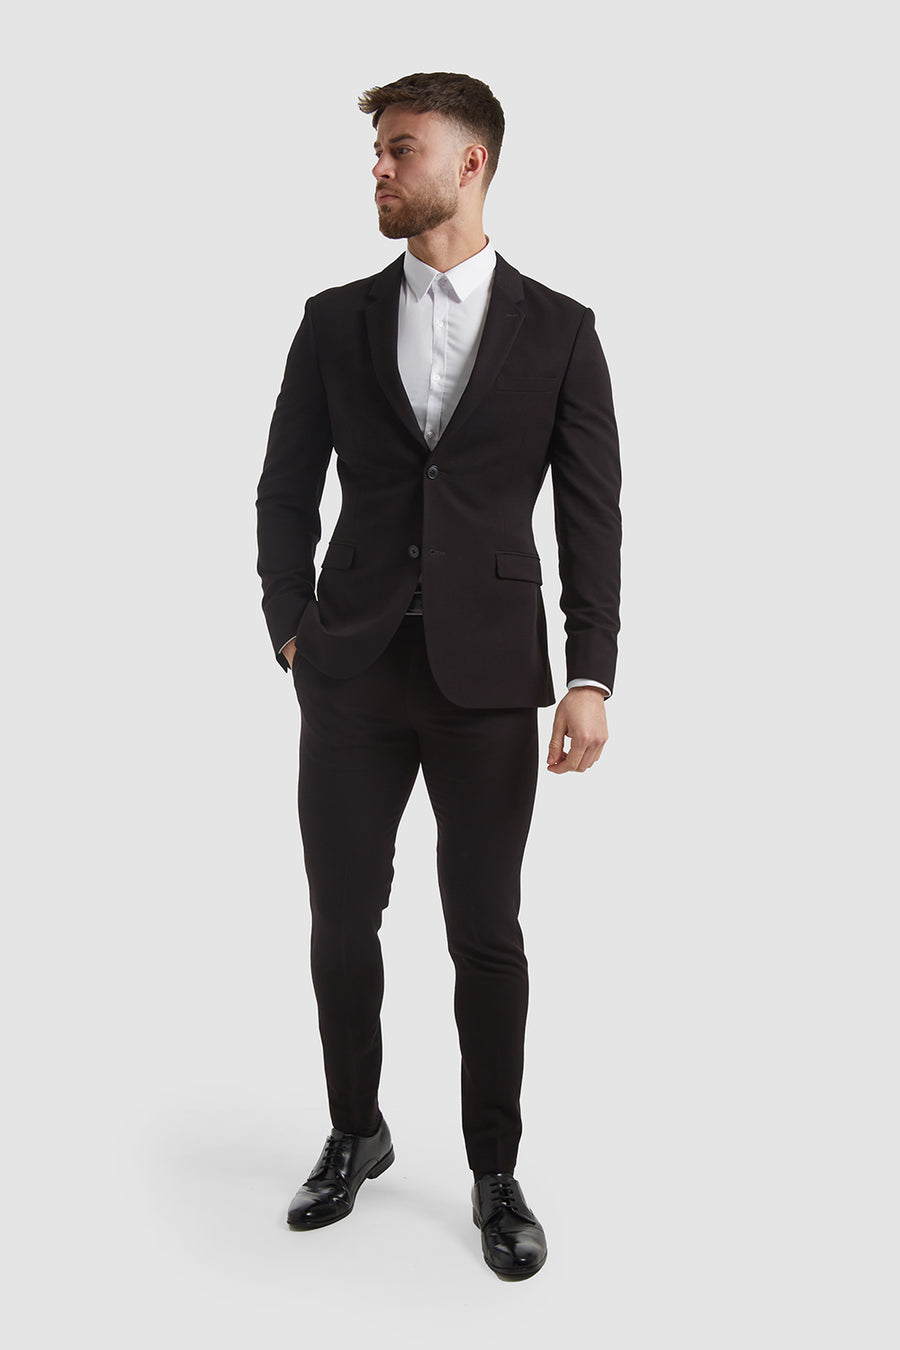 True Athletic Fit Suit Jacket in Black - TAILORED ATHLETE - USA